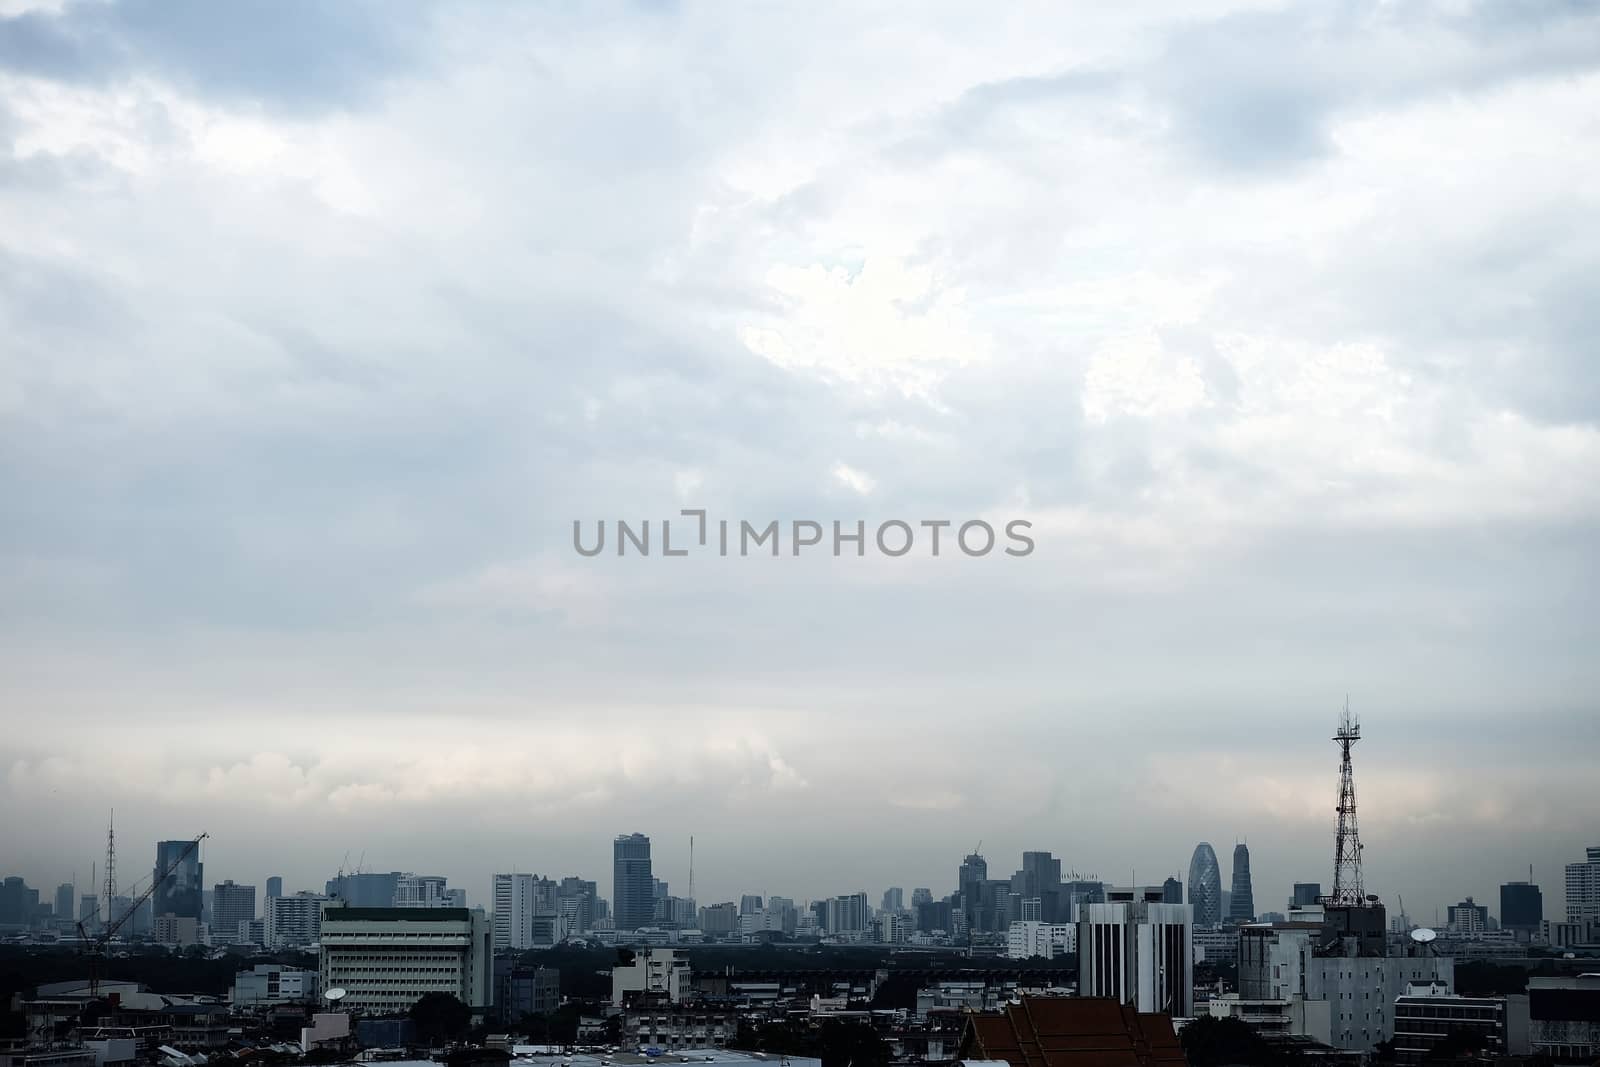 Scenery of Bangkok Cityscape From Golden Mountain Temple, Bangkok is The Capital of Thailand.